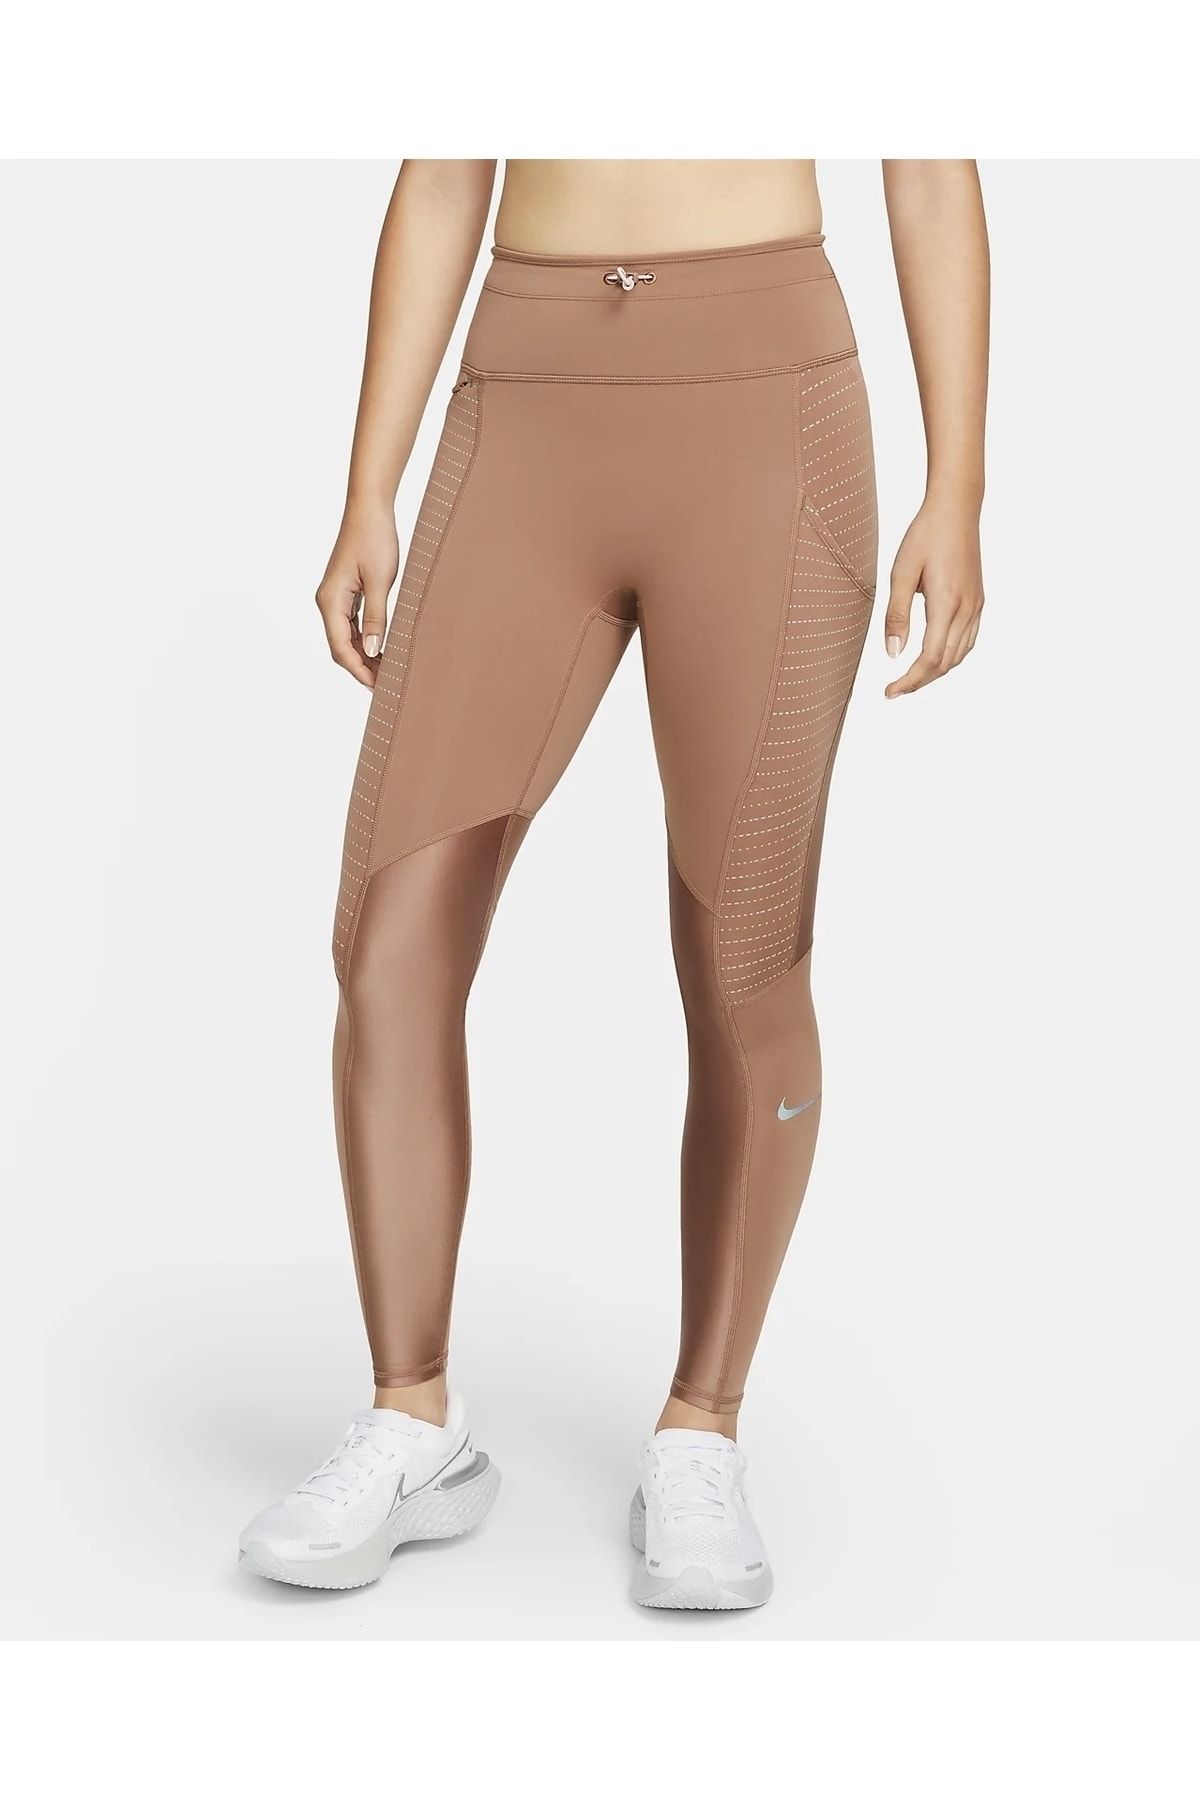 Nike Epic Lux Running Compression Training Tights Women's Small AJ8758 010